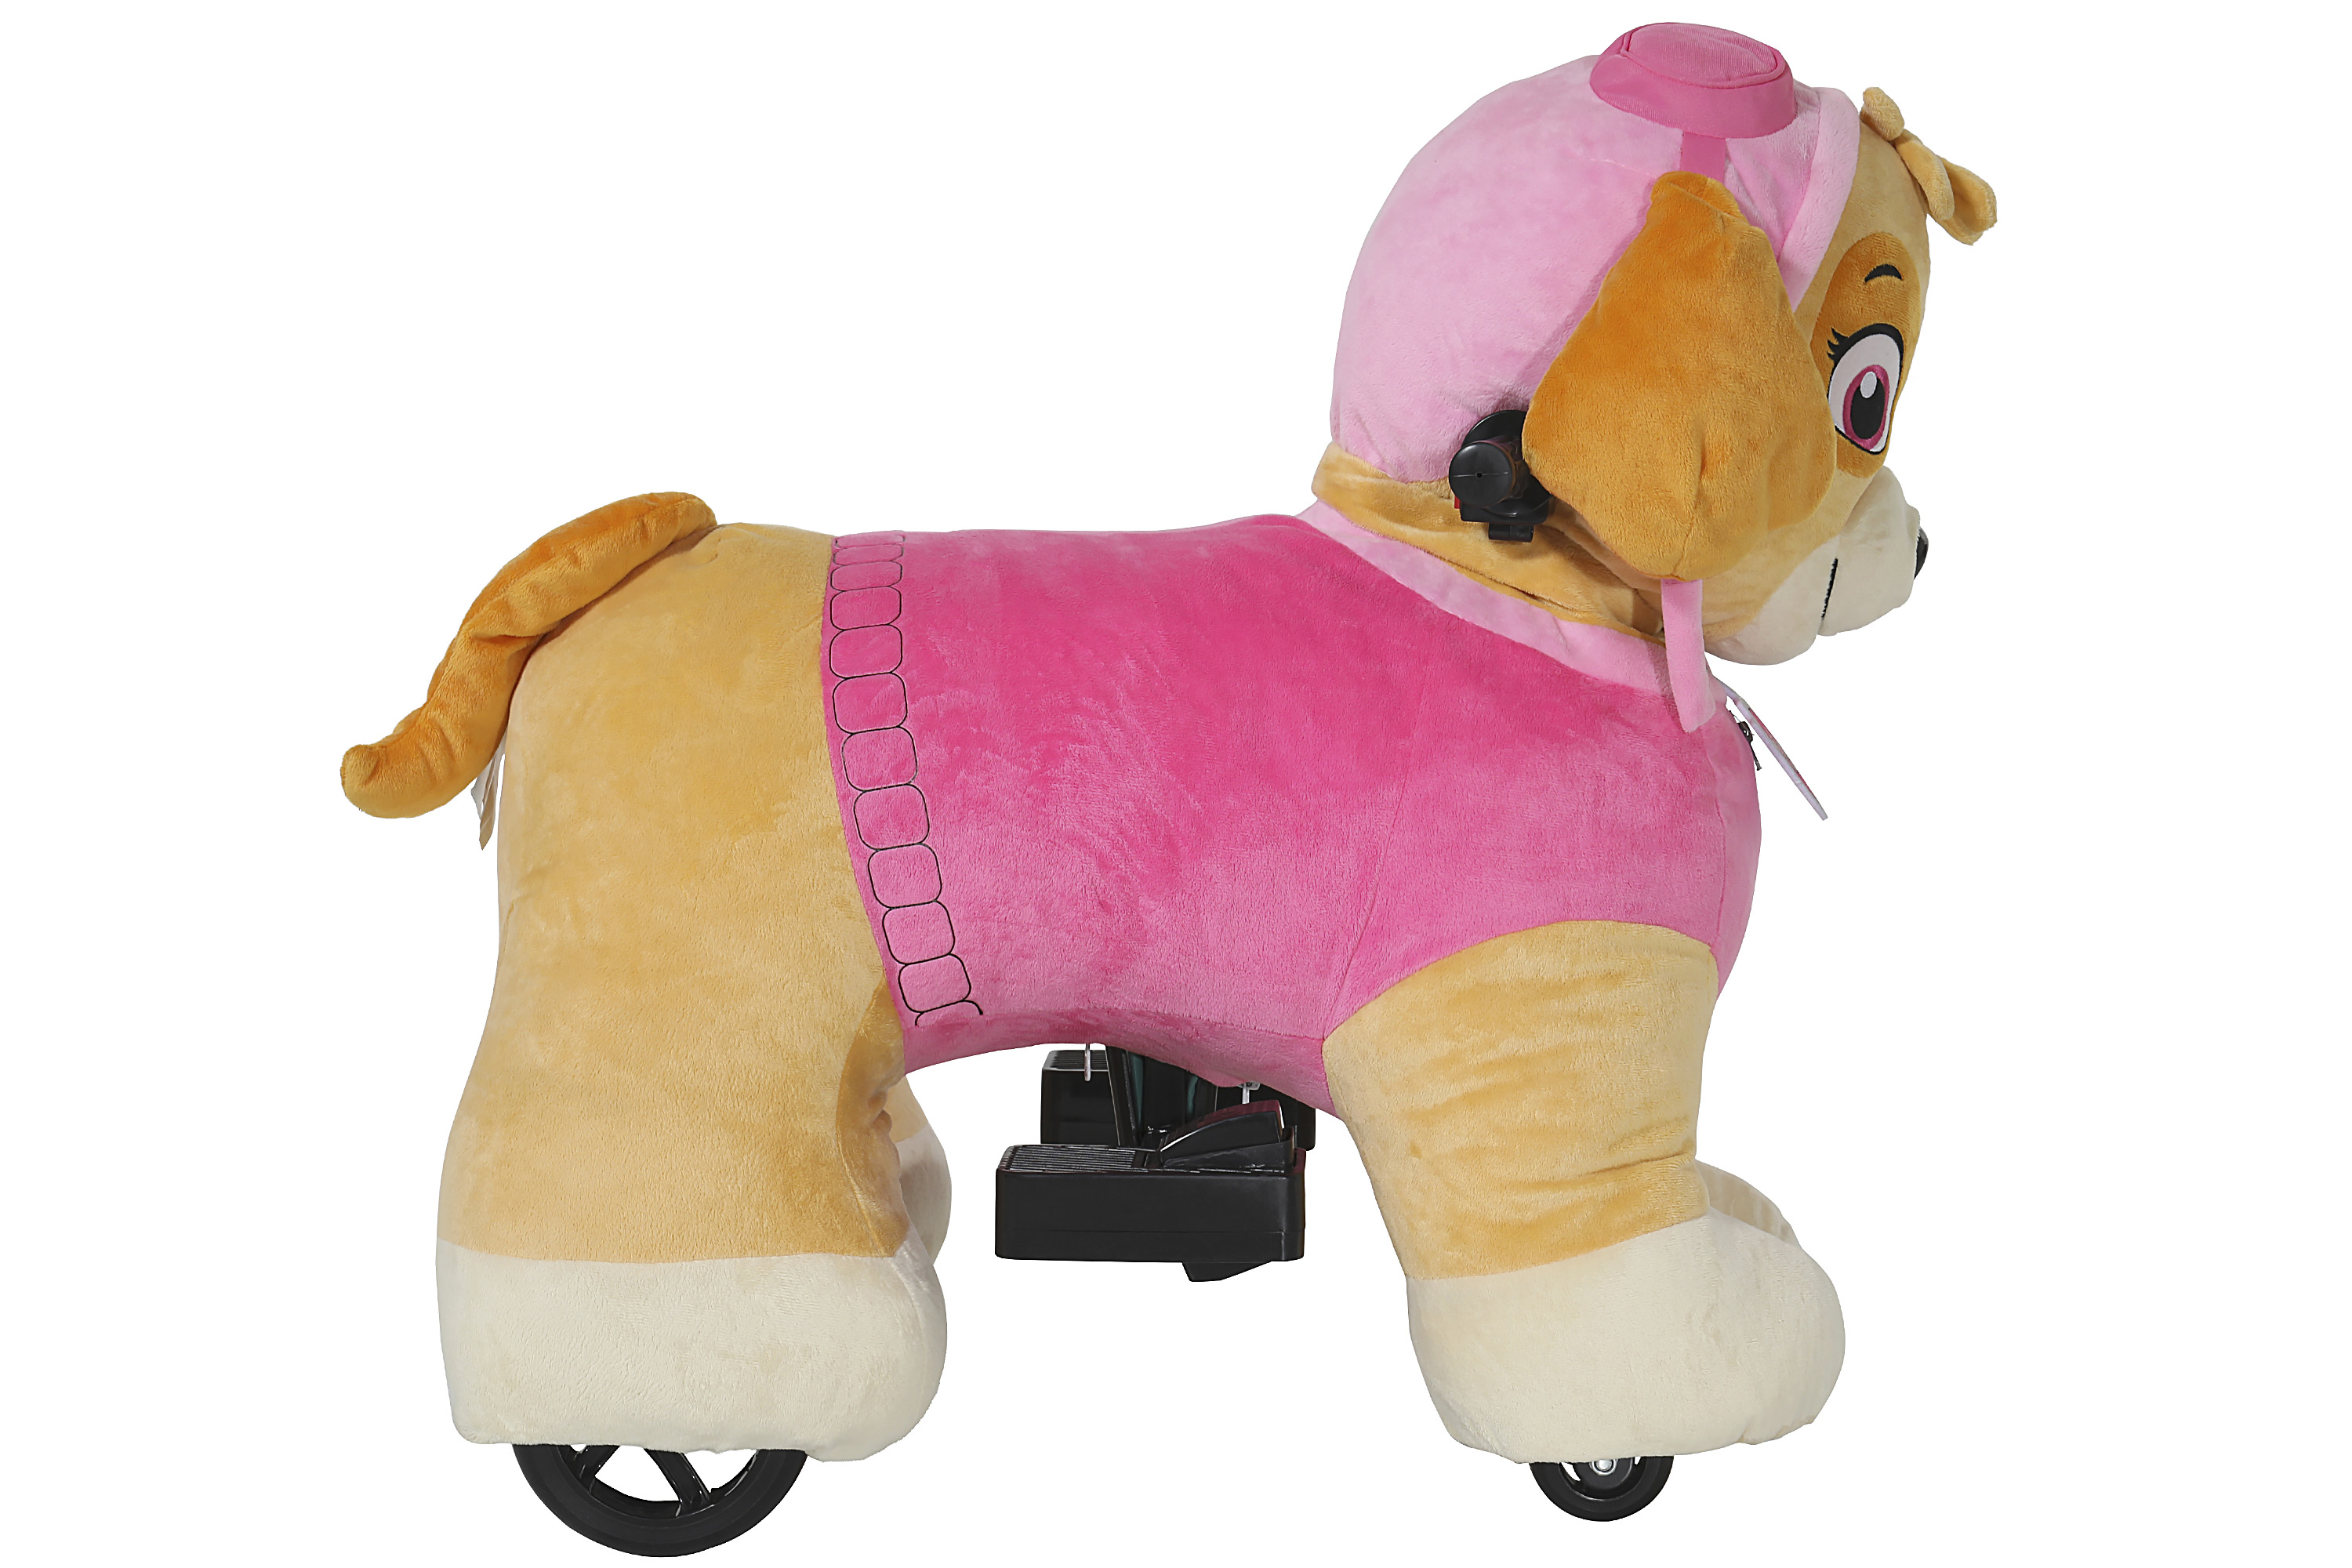 Paw Patrol 6 Volt Plush Skye Ride-on with Pup House Included by Dynacraft! - image 4 of 7